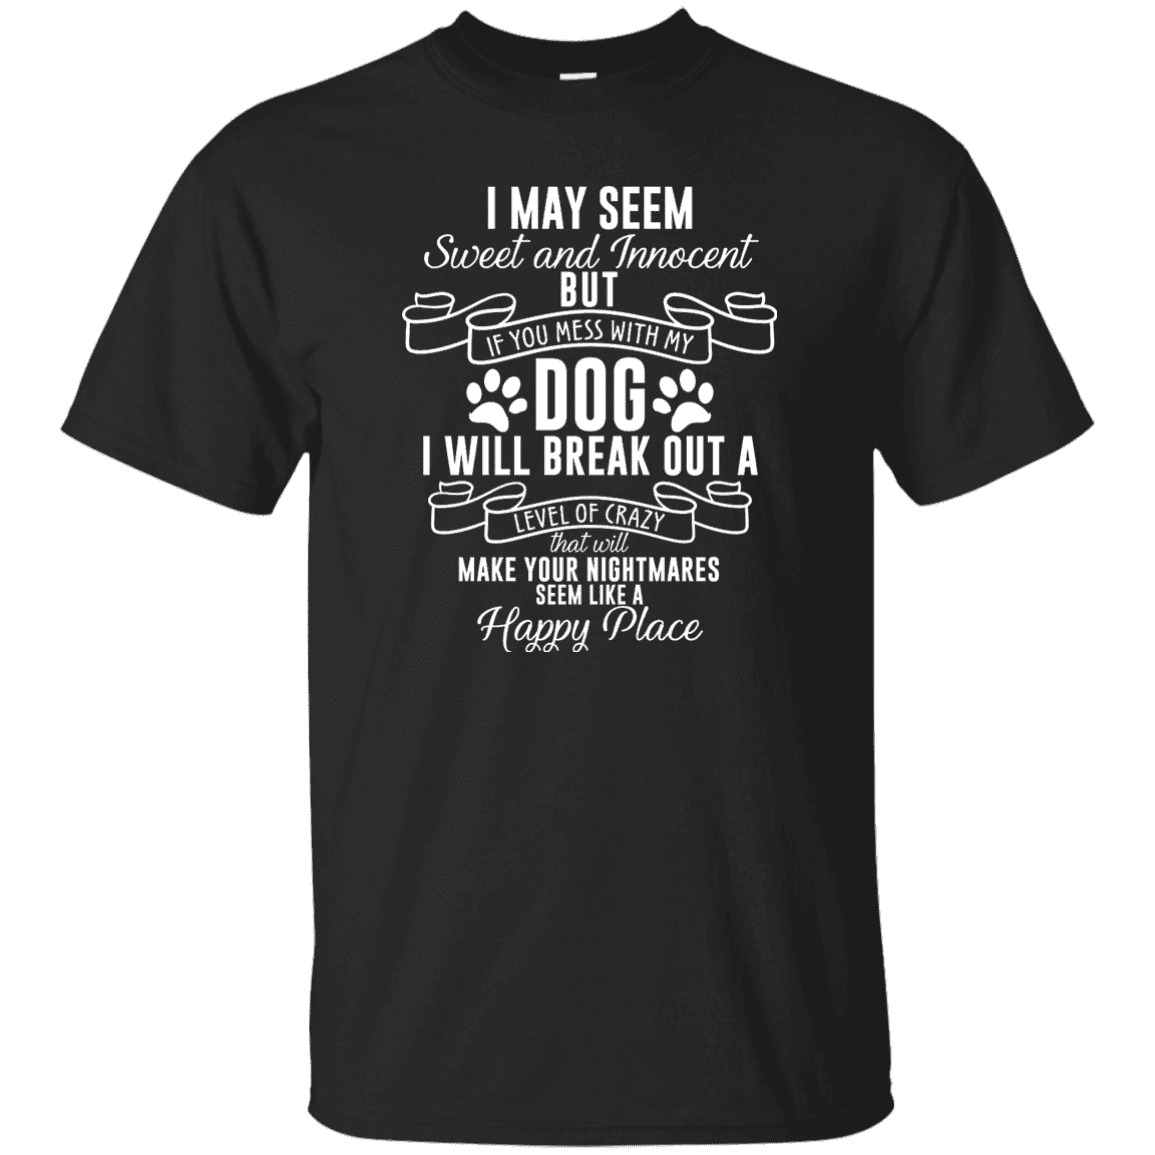 I May Seem Sweet And Innocent - T Shirt – Rescuers Club